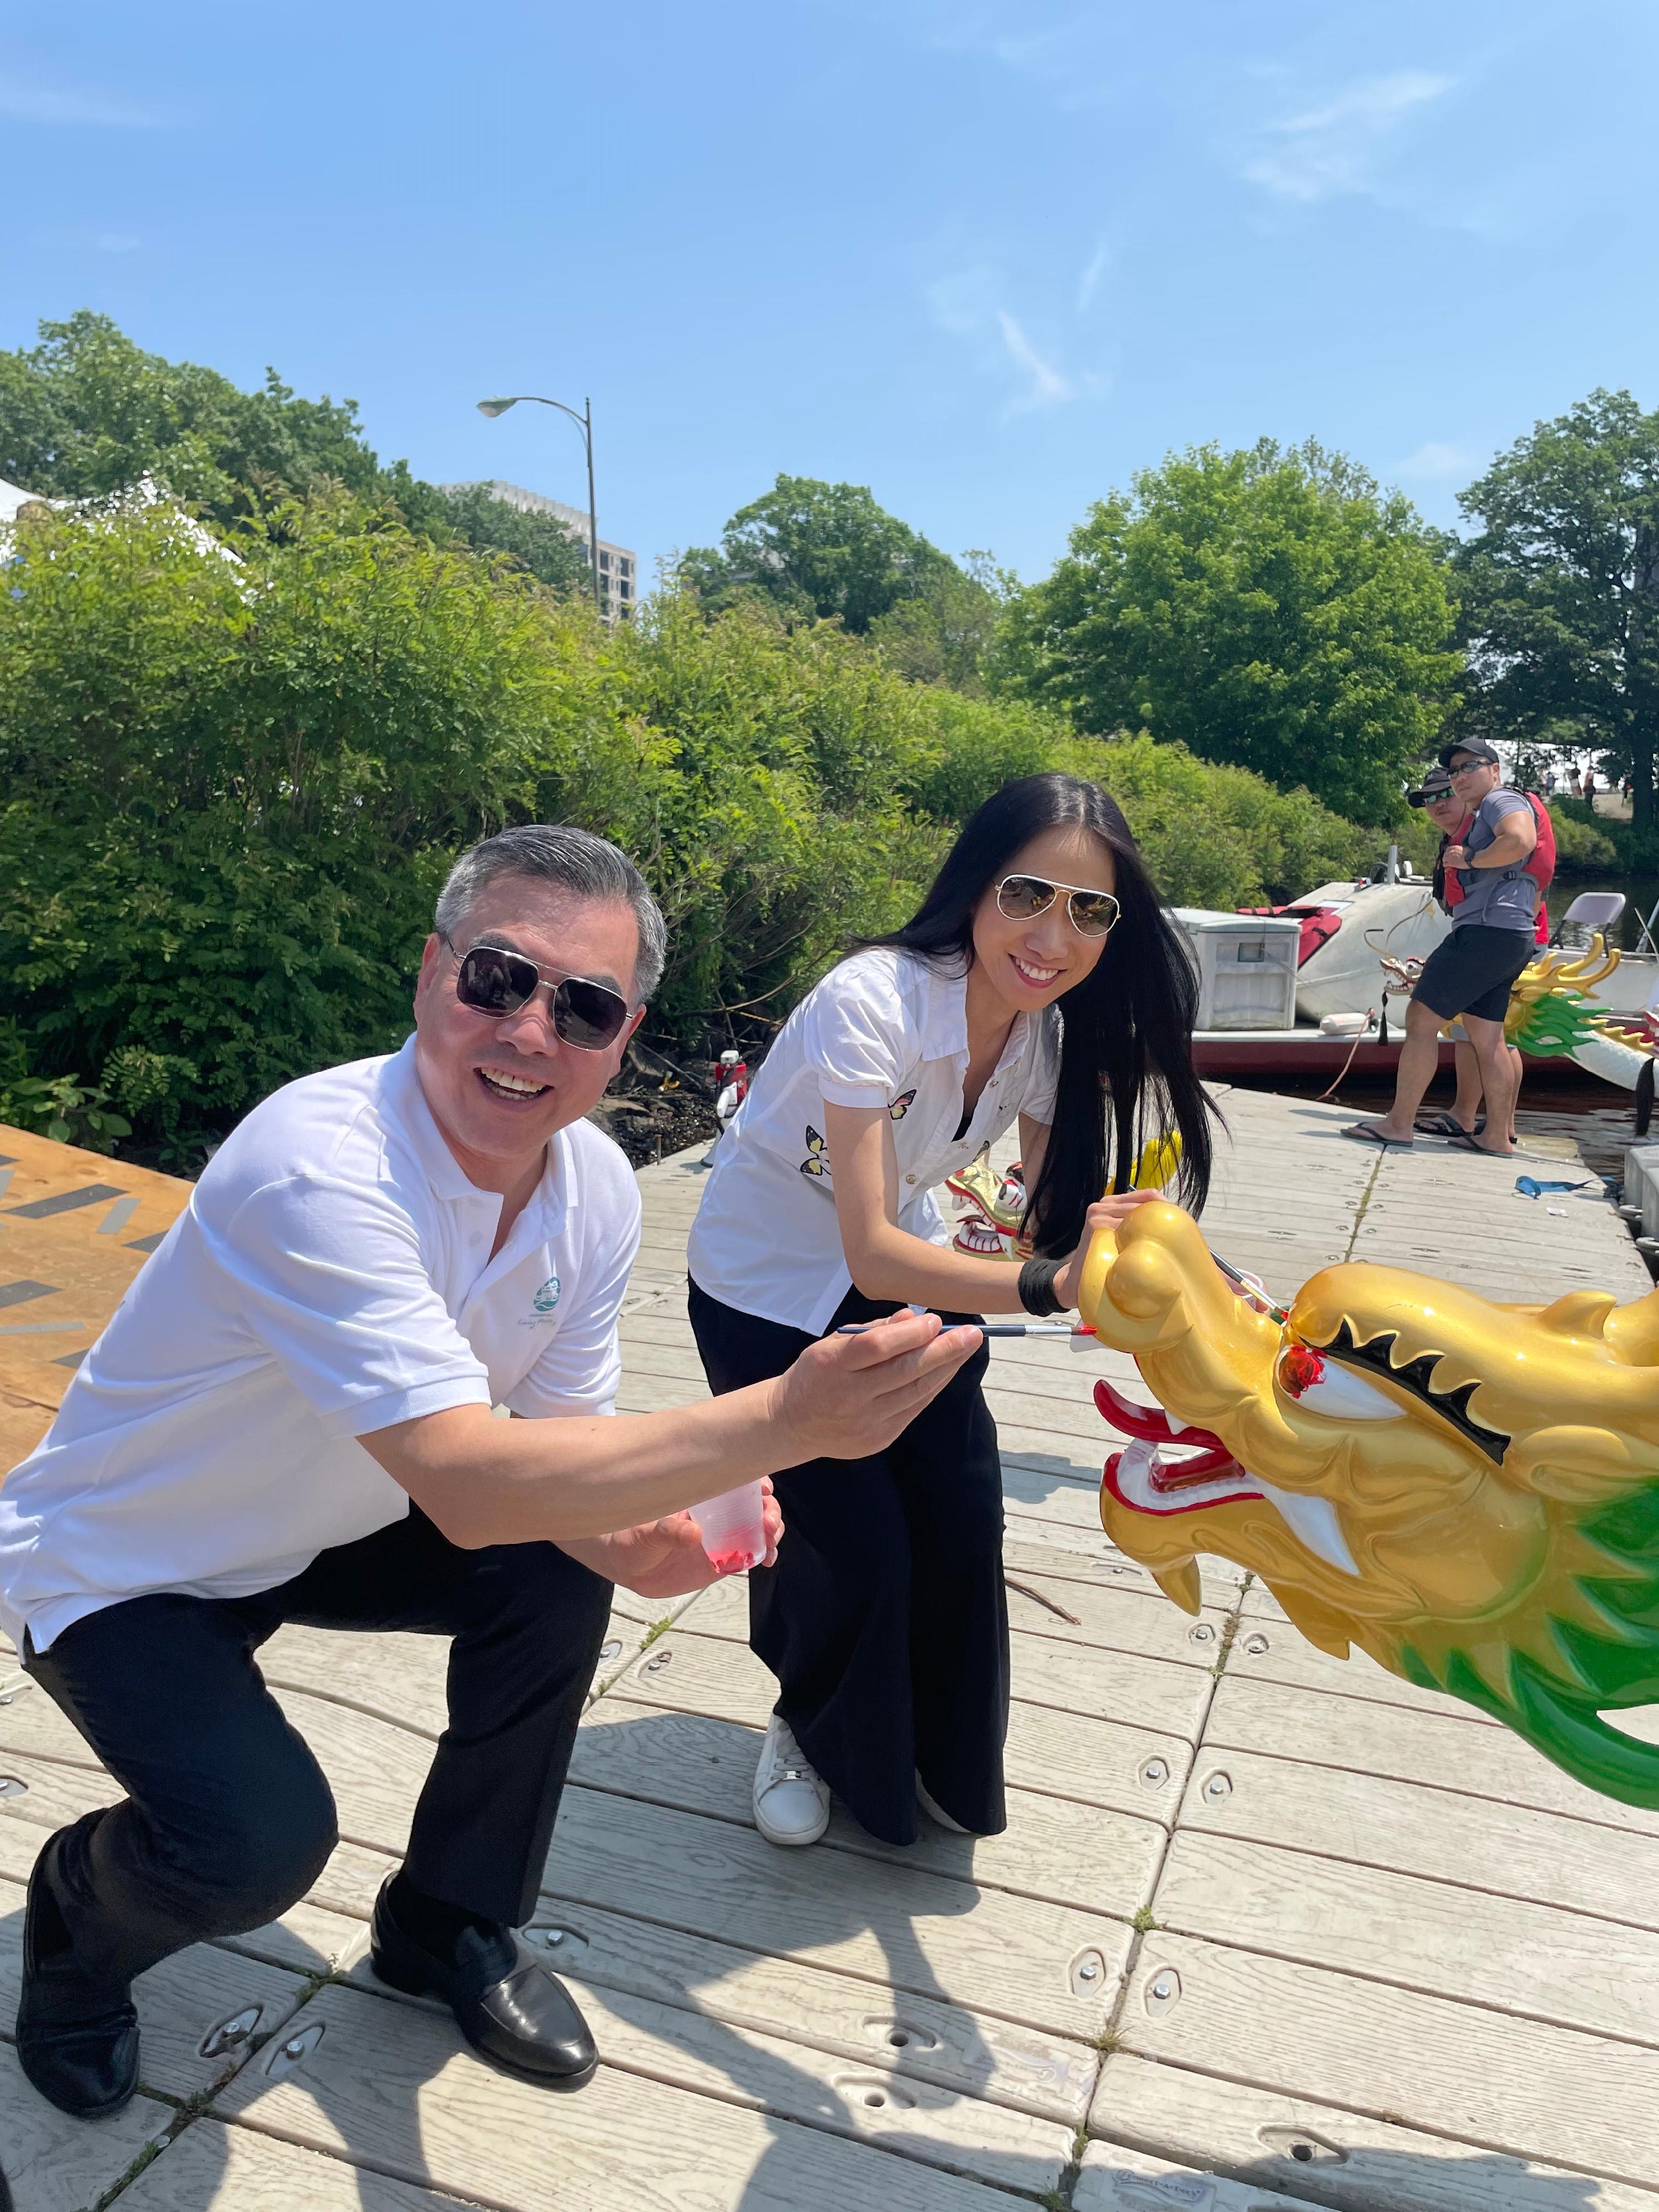 The 44th Boston Hong Kong Dragon Boat Festival was held today (June 11, Boston time). Picture shows the Director of the Hong Kong Economic and Trade Office in New York, Ms Candy Nip (right), with the Consul General of the People's Republic of China in New York, Ambassador Huang Ping (left), dotting the eyes of the newly commissioned Brand Hong Kong dragonboat.